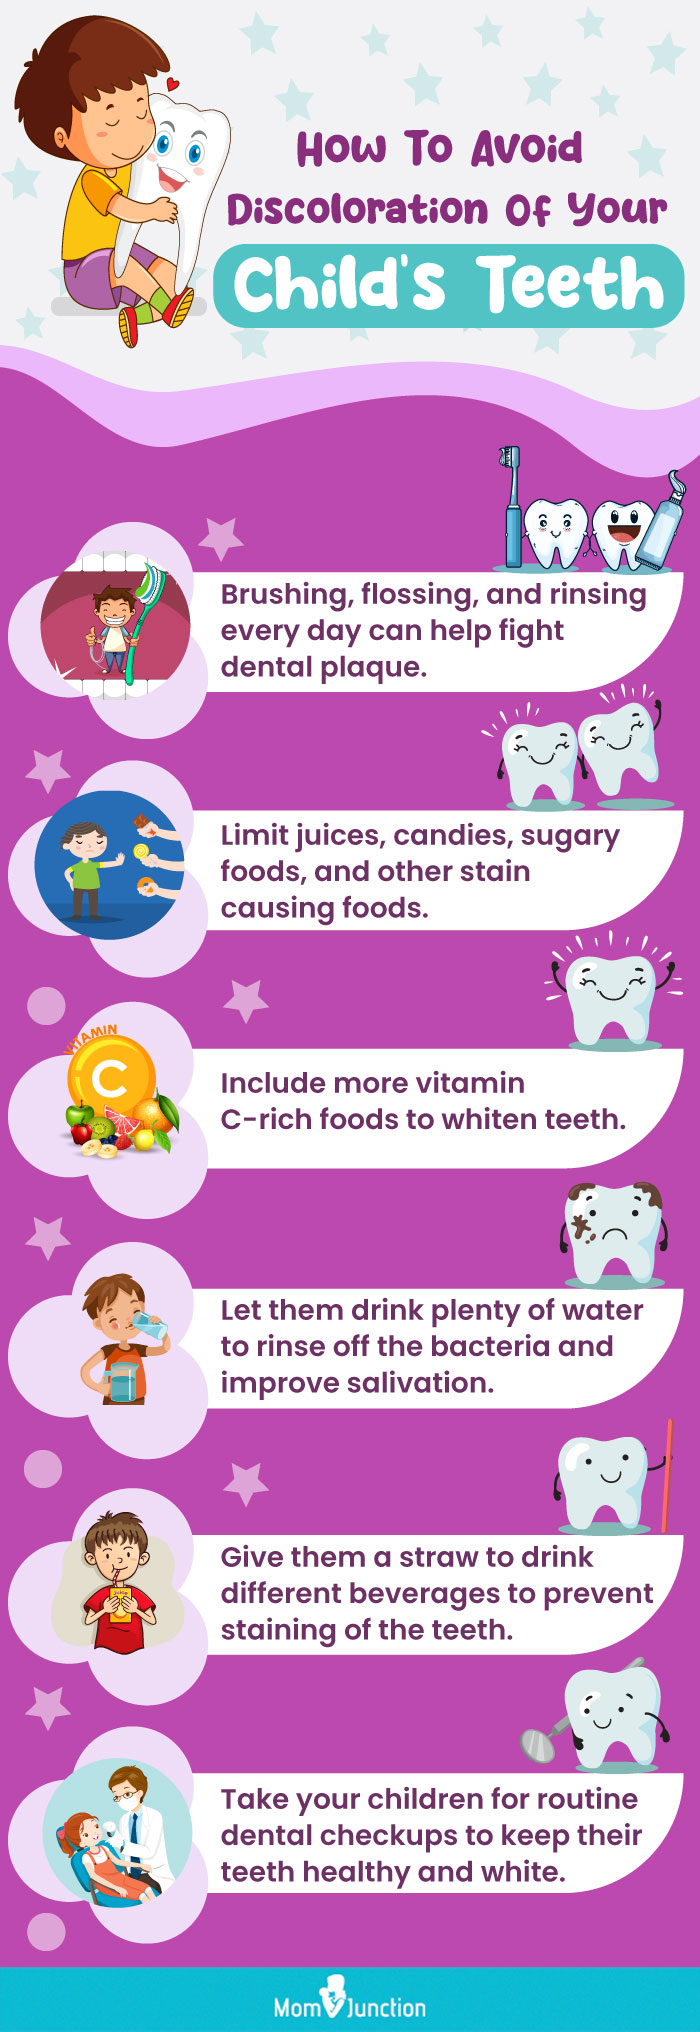 how to avoid discoloration of your childs teeth (infographic)